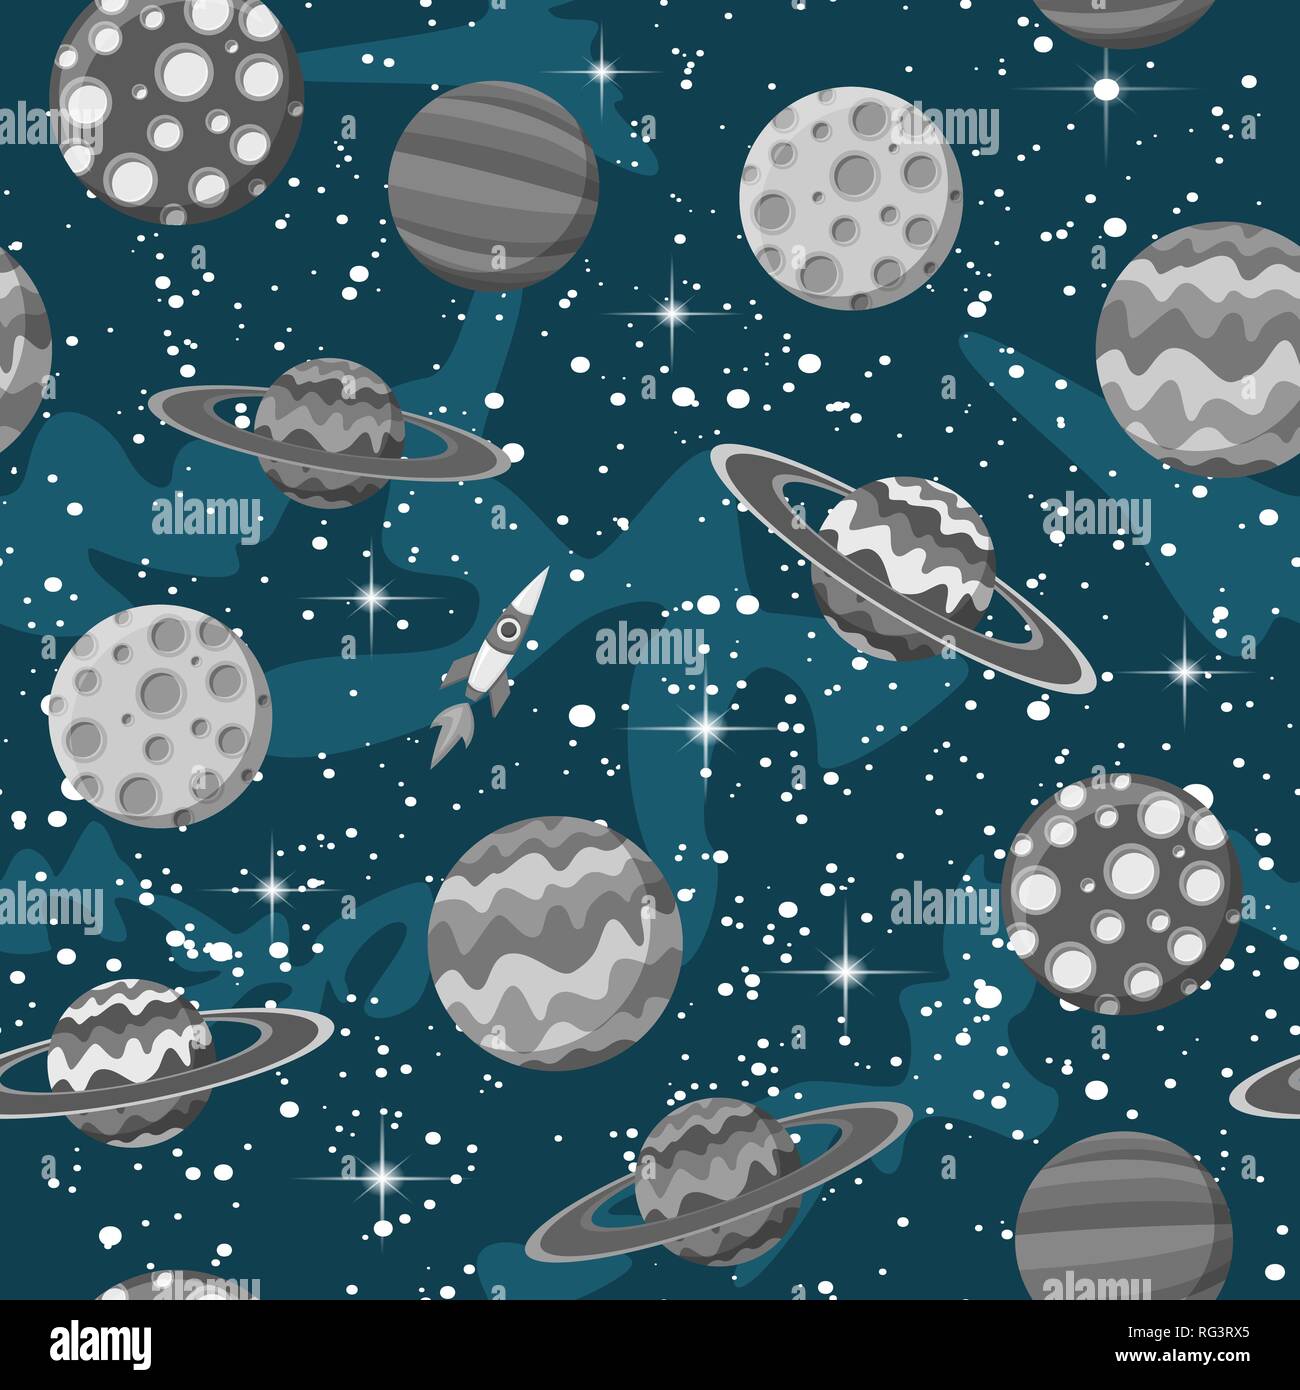 Cartoon hand-drawn space, planets seamless pattern vector background Stock Vector